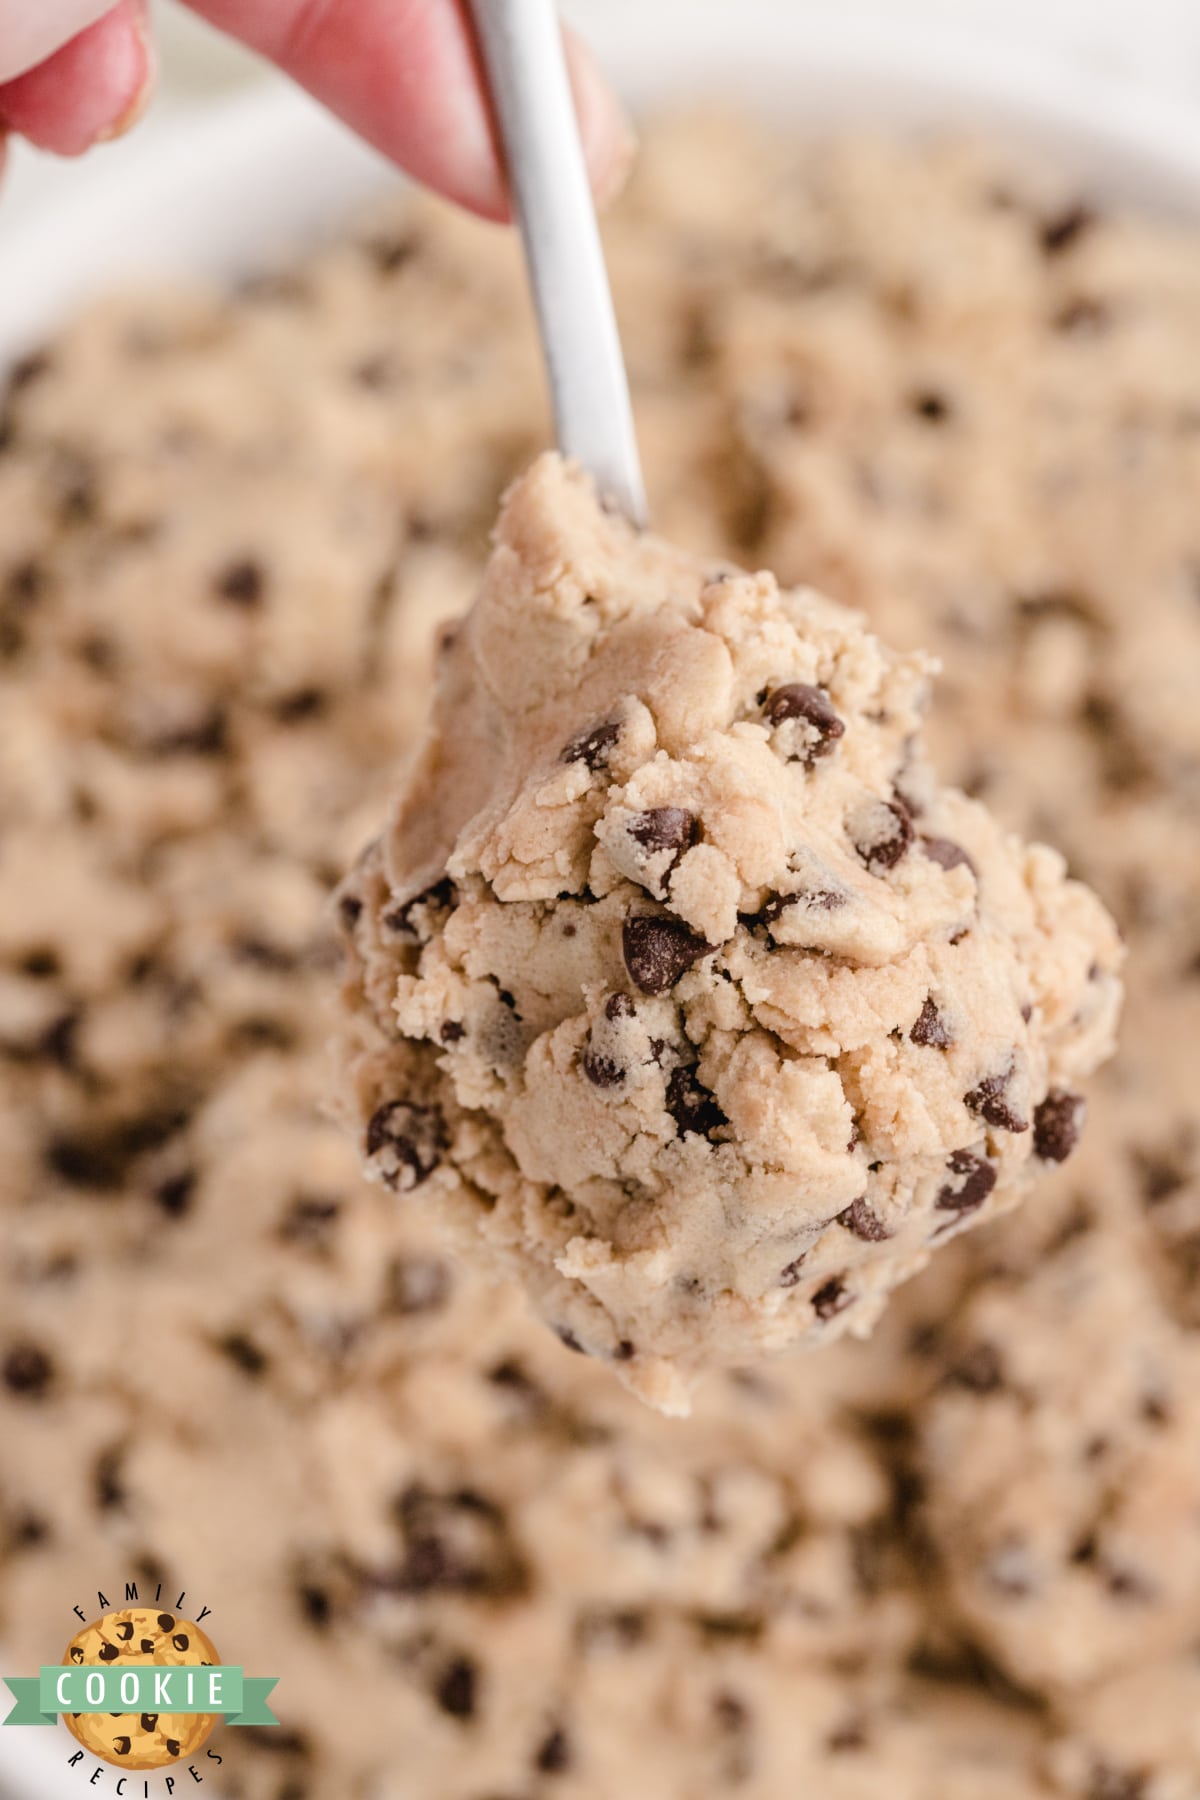 Safe to eat cookie dough 